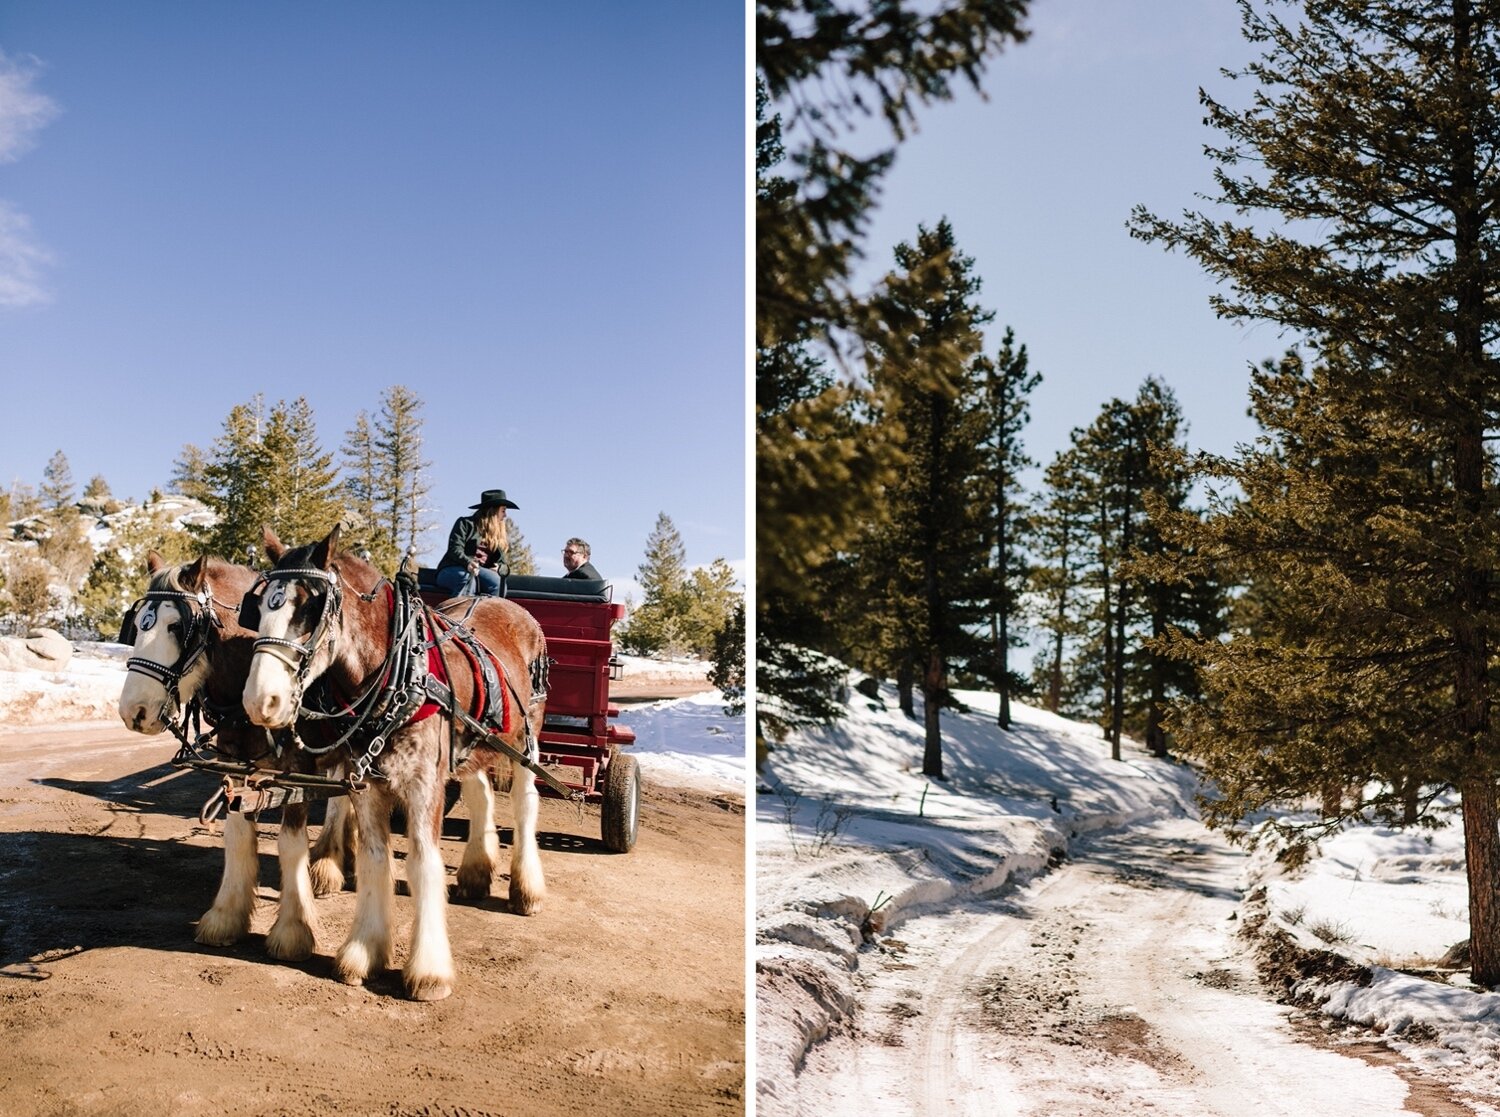  Wedding horse pulled carriage, Winter Wedding, Colorado Wedding, Snowy Wedding, Mountain Wedding, Colorado Wedding Planner, Colorado Wedding Rentals, Red Feather Lakes Wedding, Fort Collins Wedding, Rocky Mountain Wedding, Rocky Mountain Bride, Inti